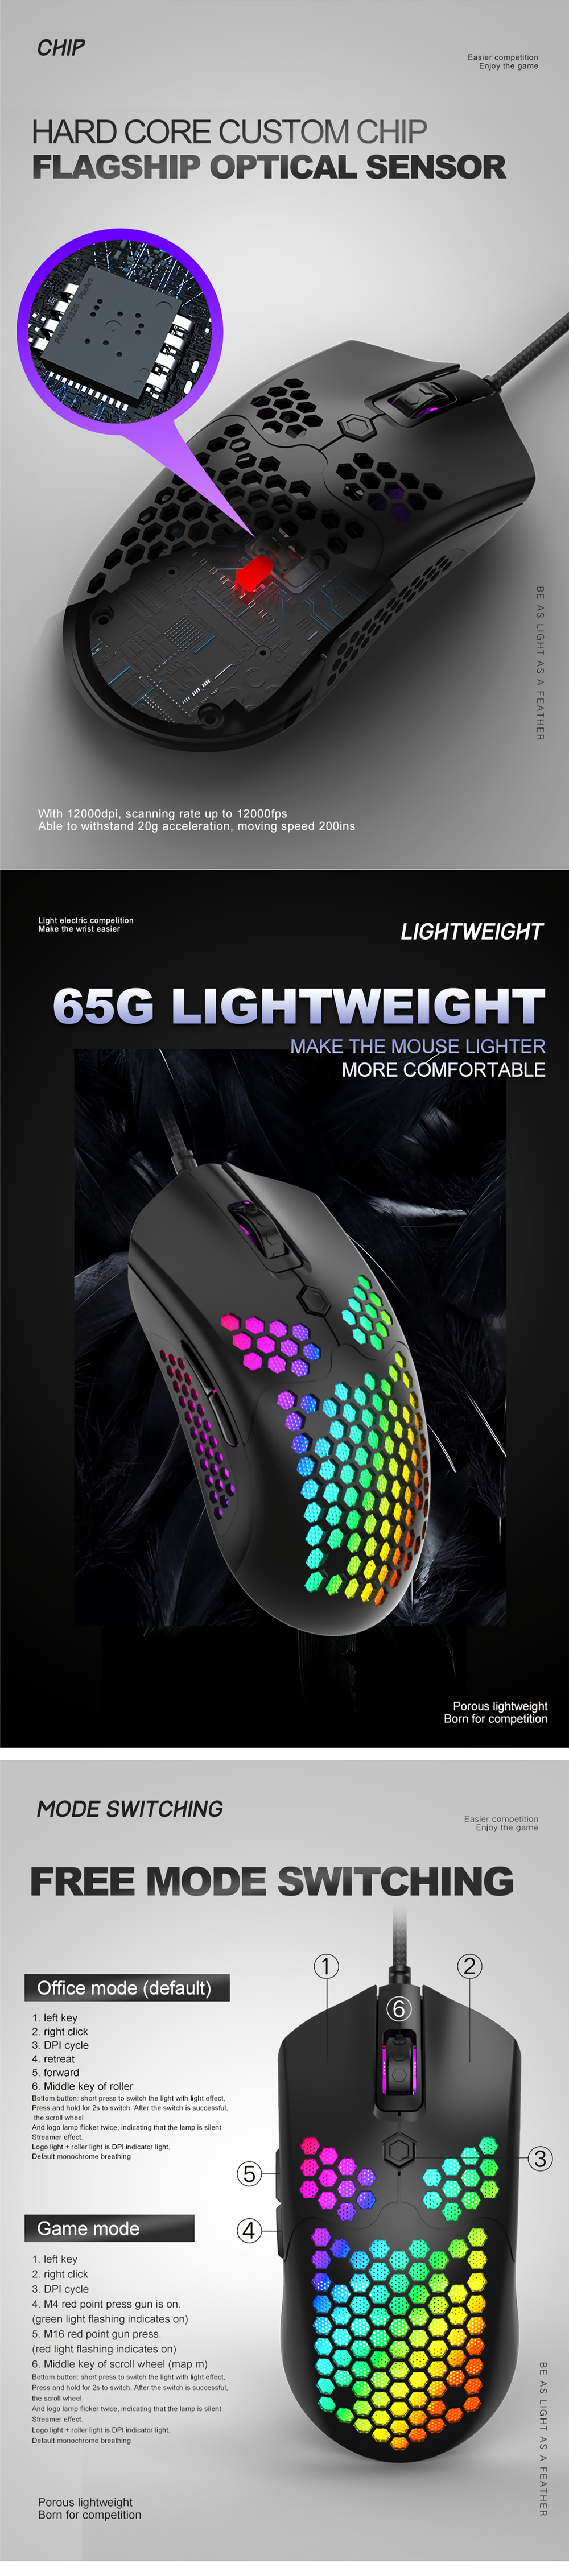 Free-wolf M5 Wired Game Mouse Breathing RGB Colorful Hollow Honeycomb Shape 12000DPI Gaming Mouse USB Wired Gamer Mice for Desktop Computer Laptop PC 14